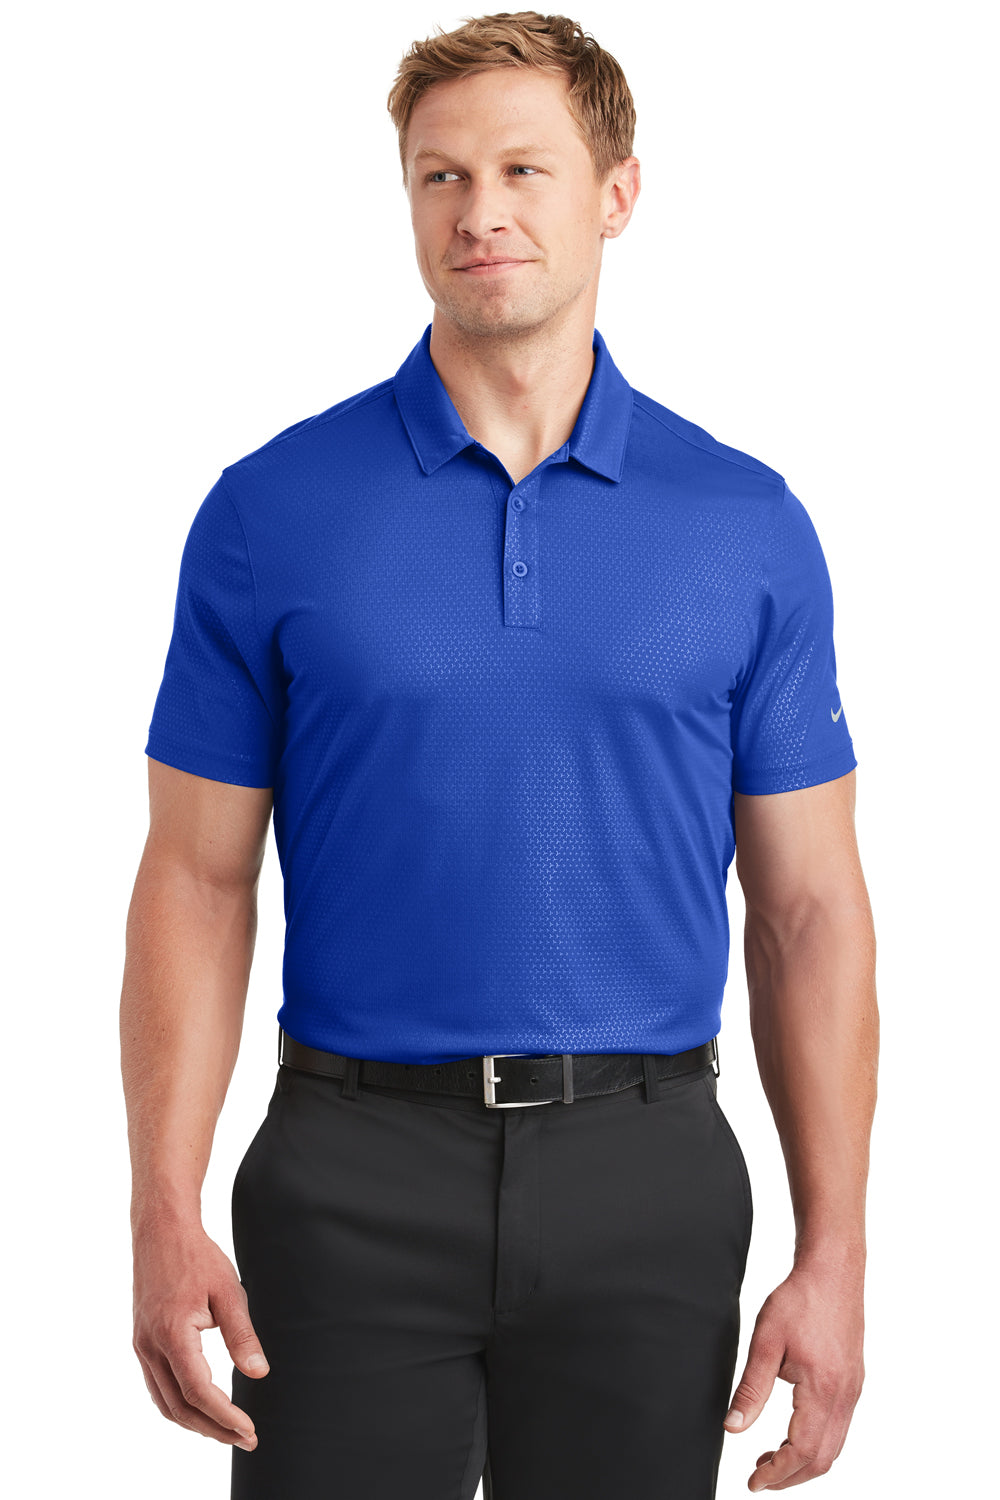 Nike 838964 Mens Dri-Fit Moisture Wicking Short Sleeve Polo Shirt Old Royal Blue Model Front